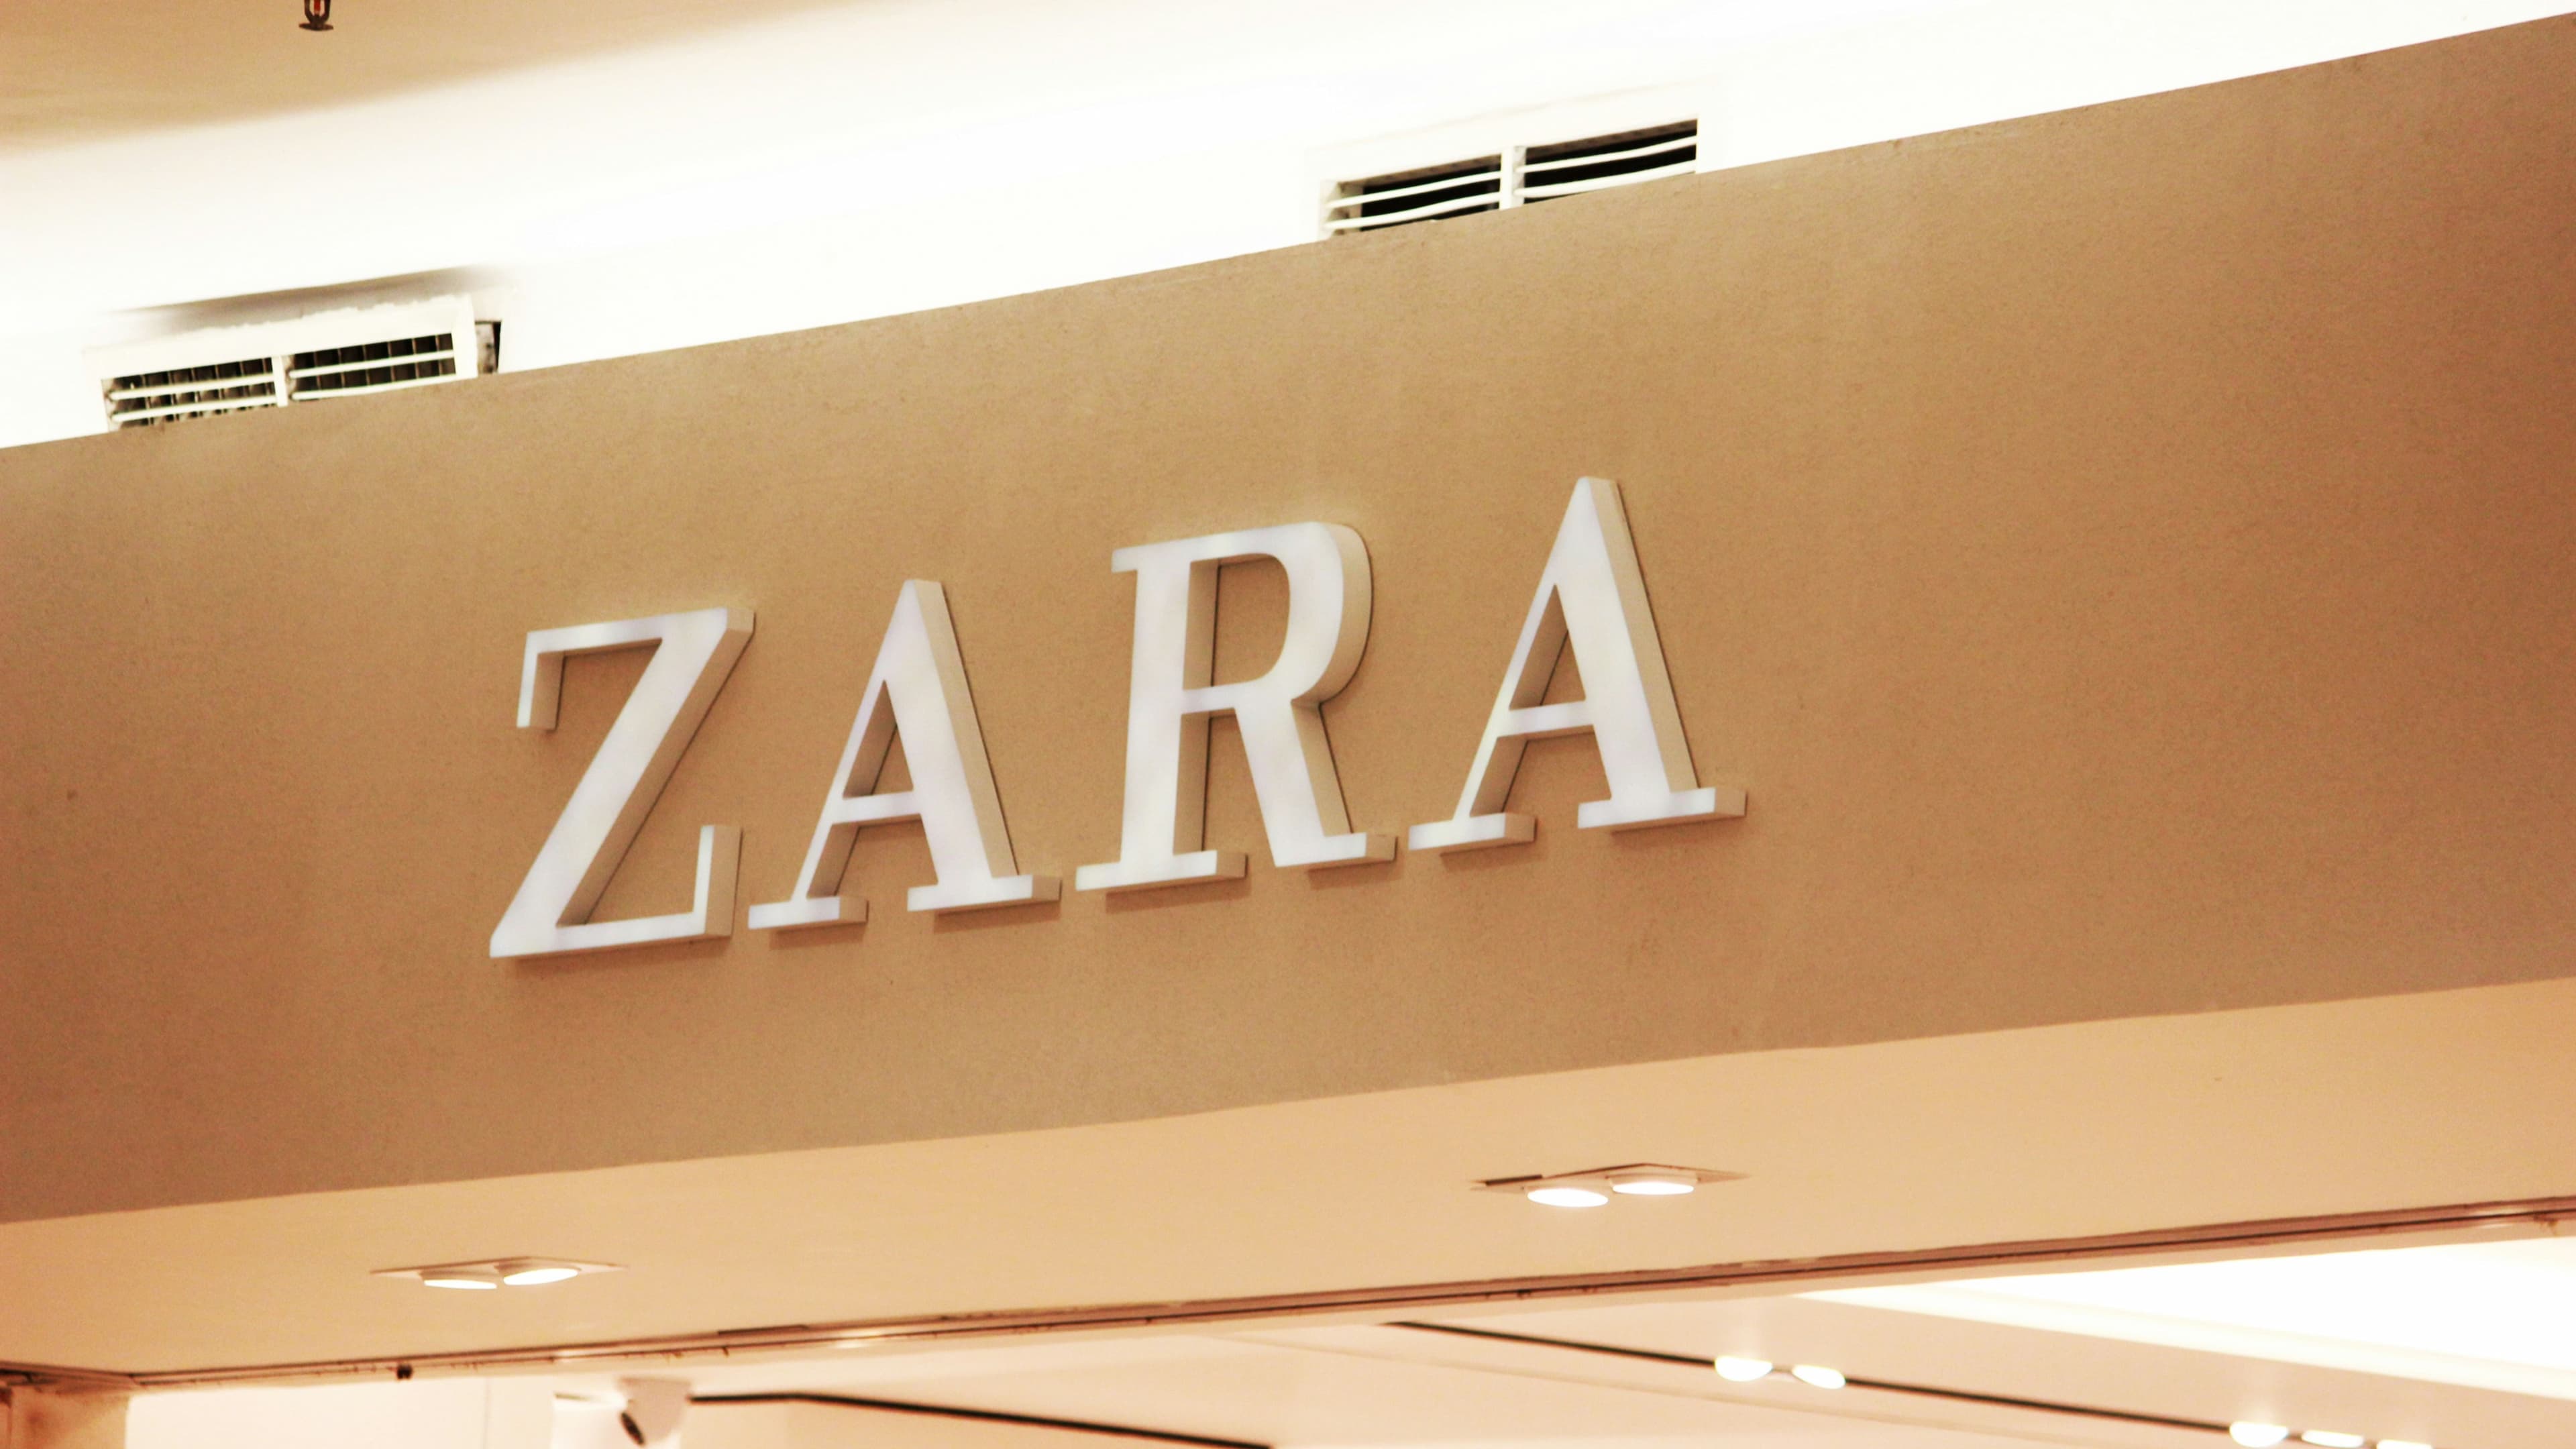 A third of Zara’s customers are women over 30, a similar proportion are in their twenties.